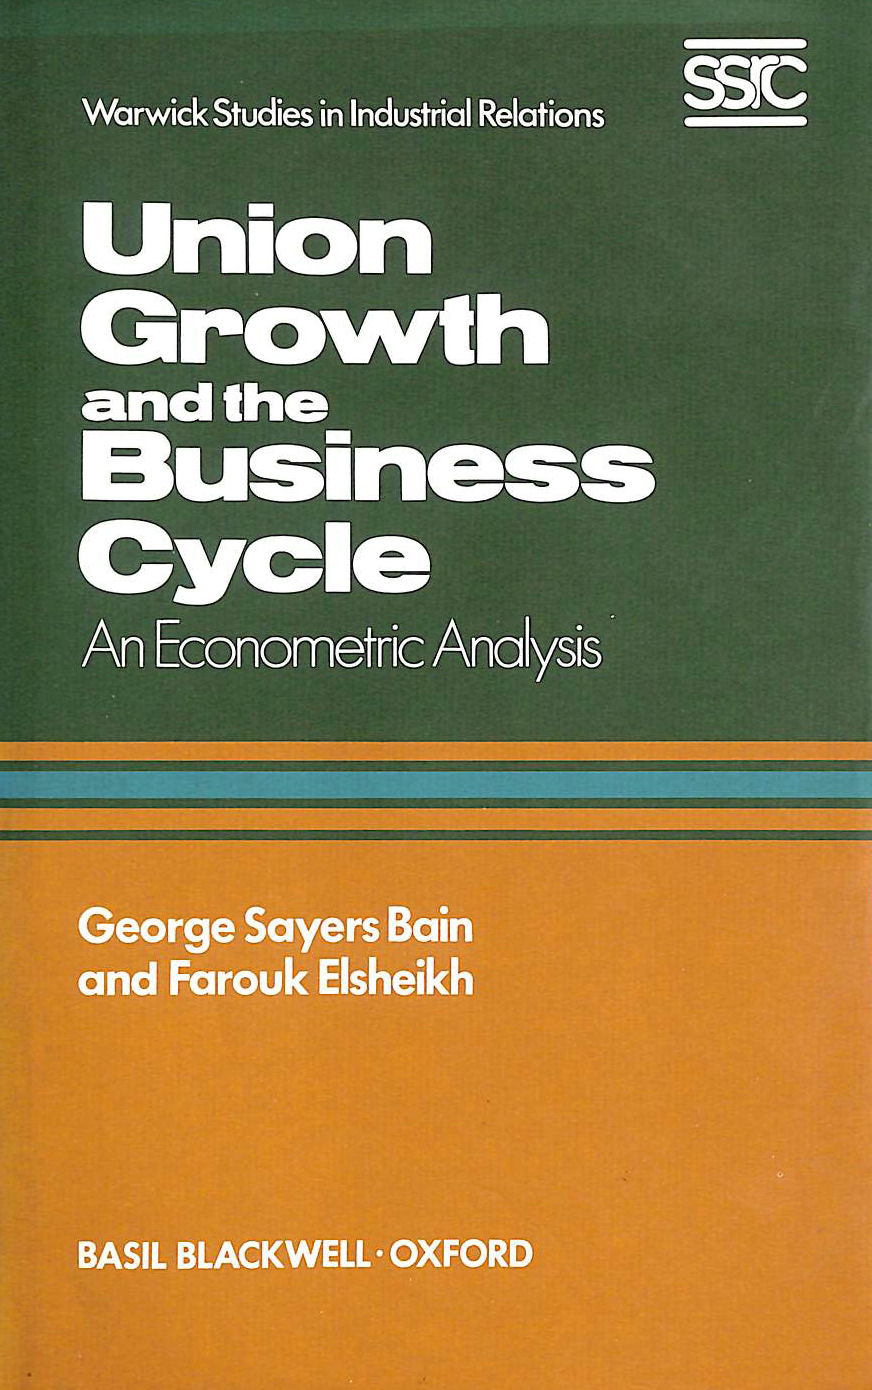 ELSHEIKH & BAIN - Union Growth and the Business Cycle: An Econometric Analysis (Warwick Studies in Industrial Relations)